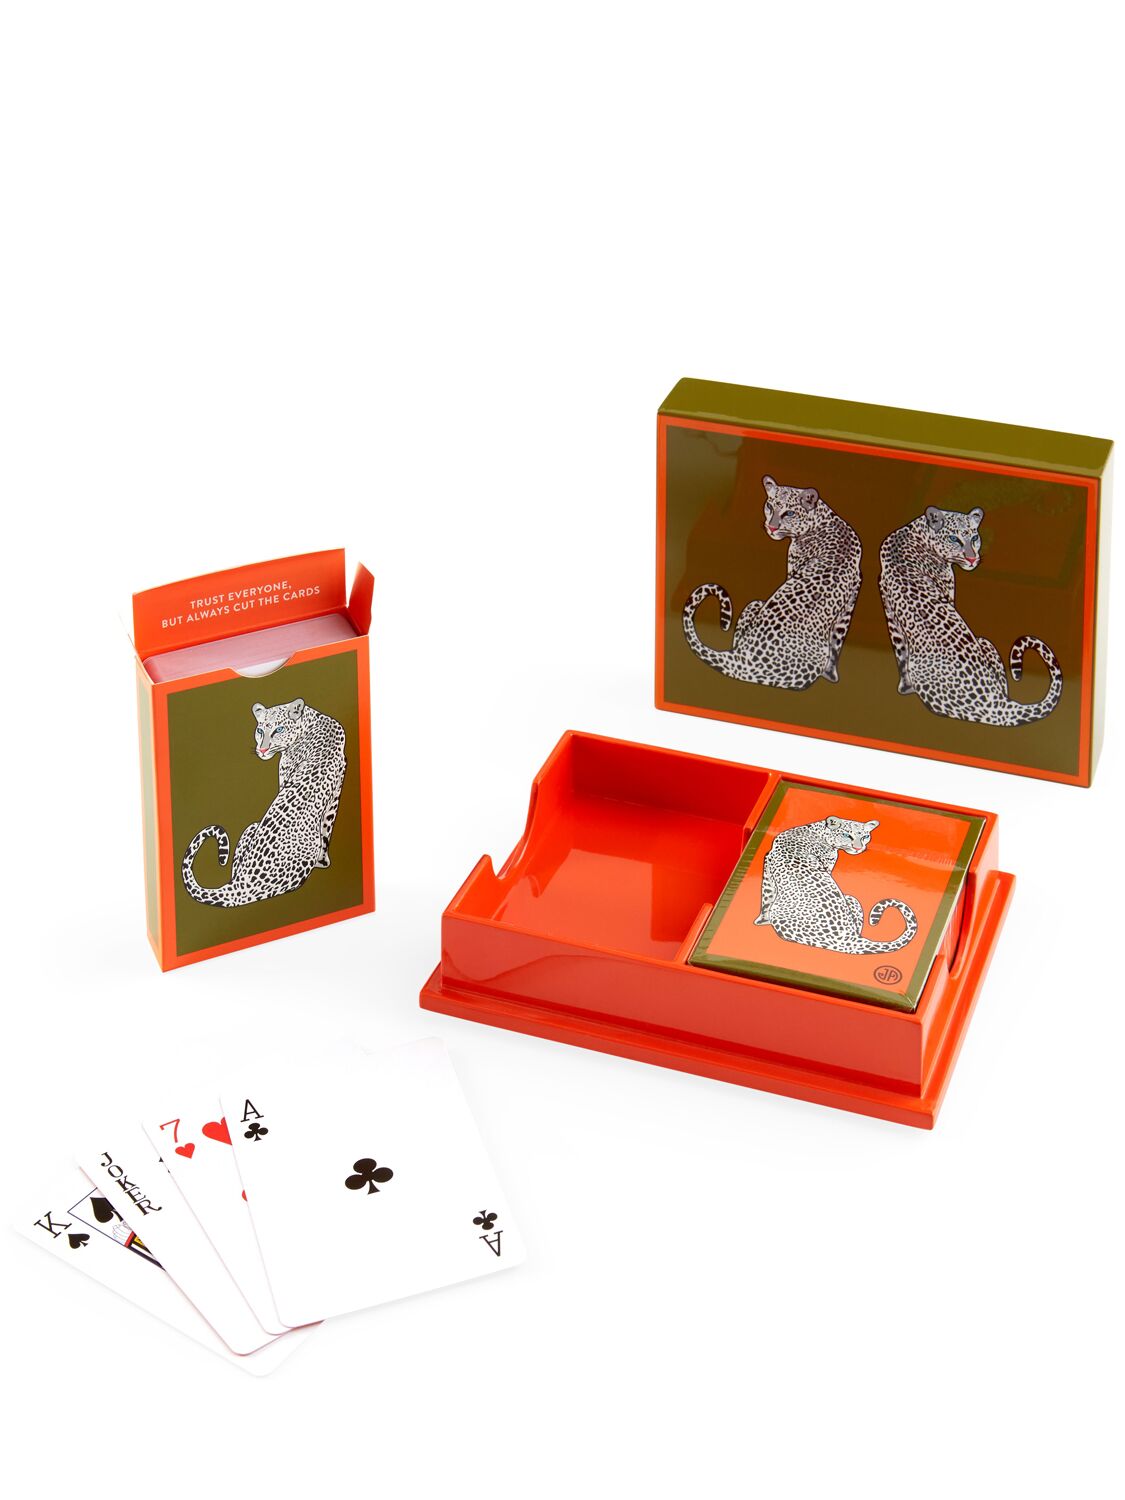 Jonathan Adler Leopard Lacquer Box & Playing Cards Set In Orange